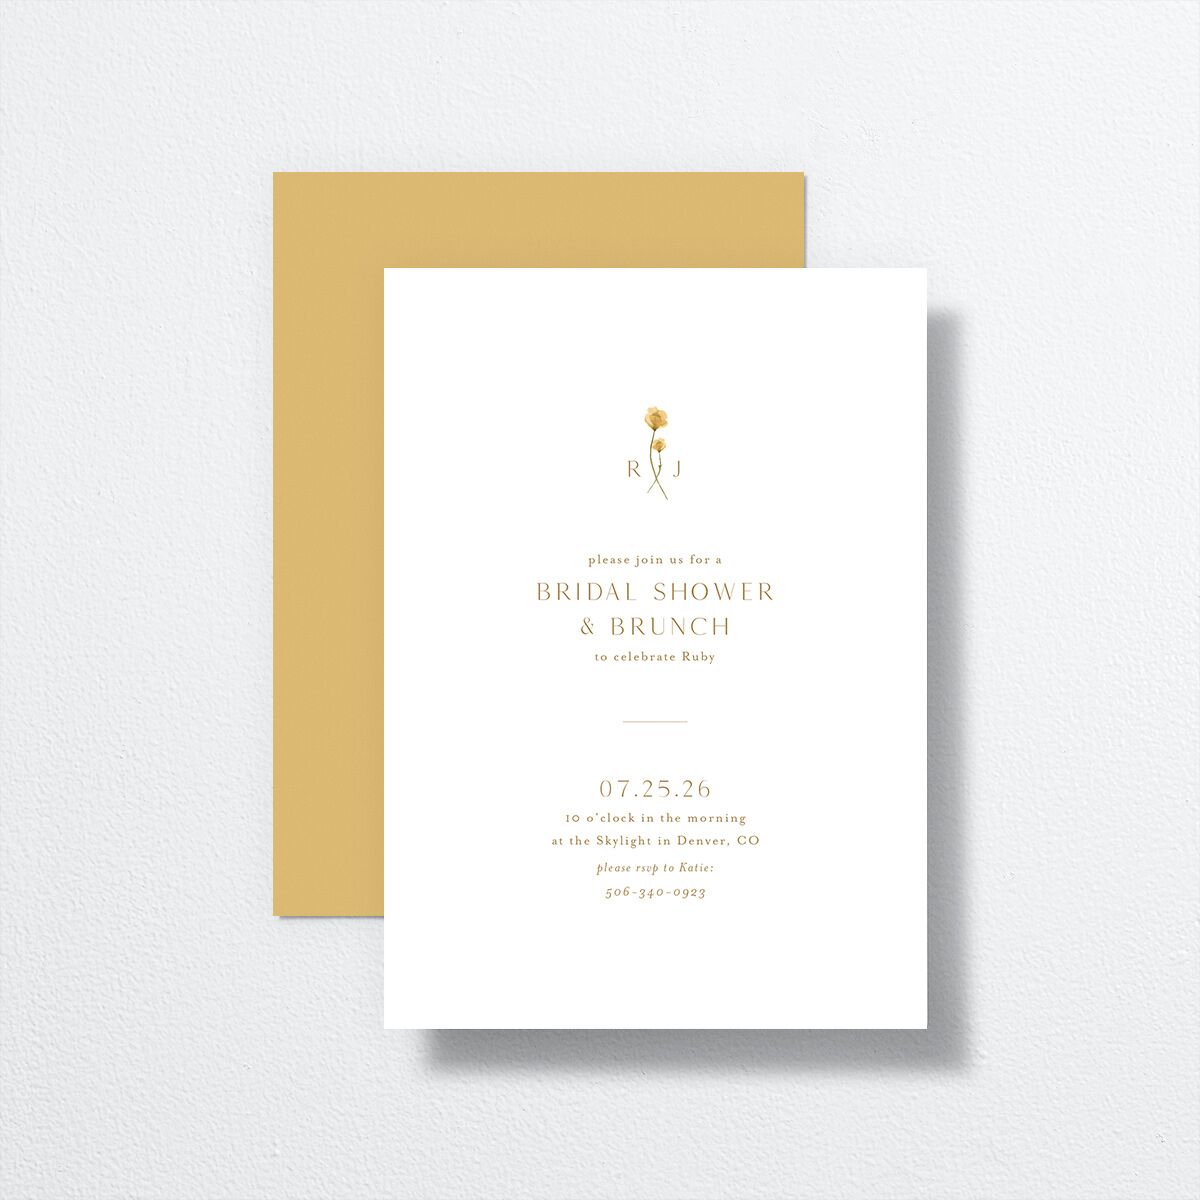 Dainty Monogram Bridal Shower Invitations front-and-back in yellow